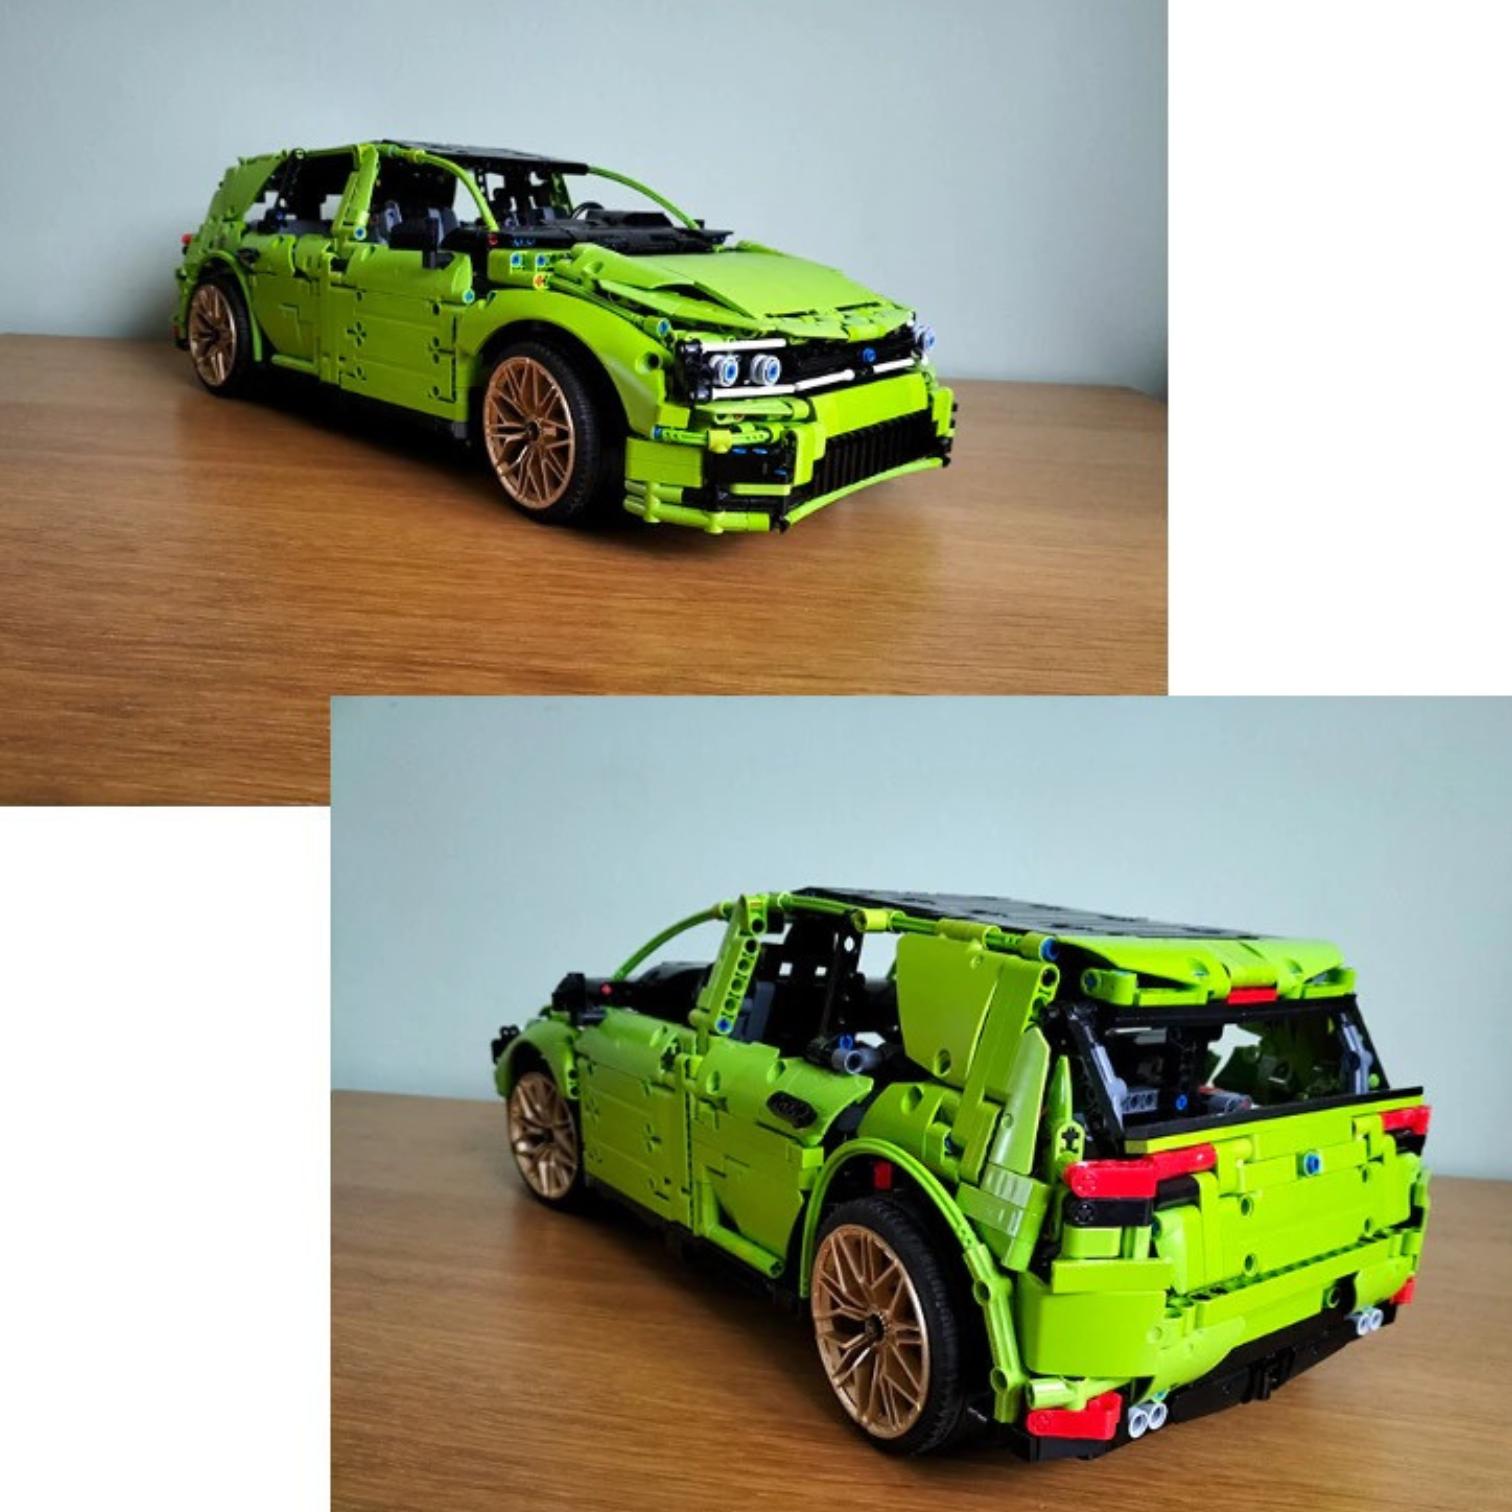 42115 VW Golf R (2019) Green Super Sports Car MOC-102567 Technic With 3696 Pieces